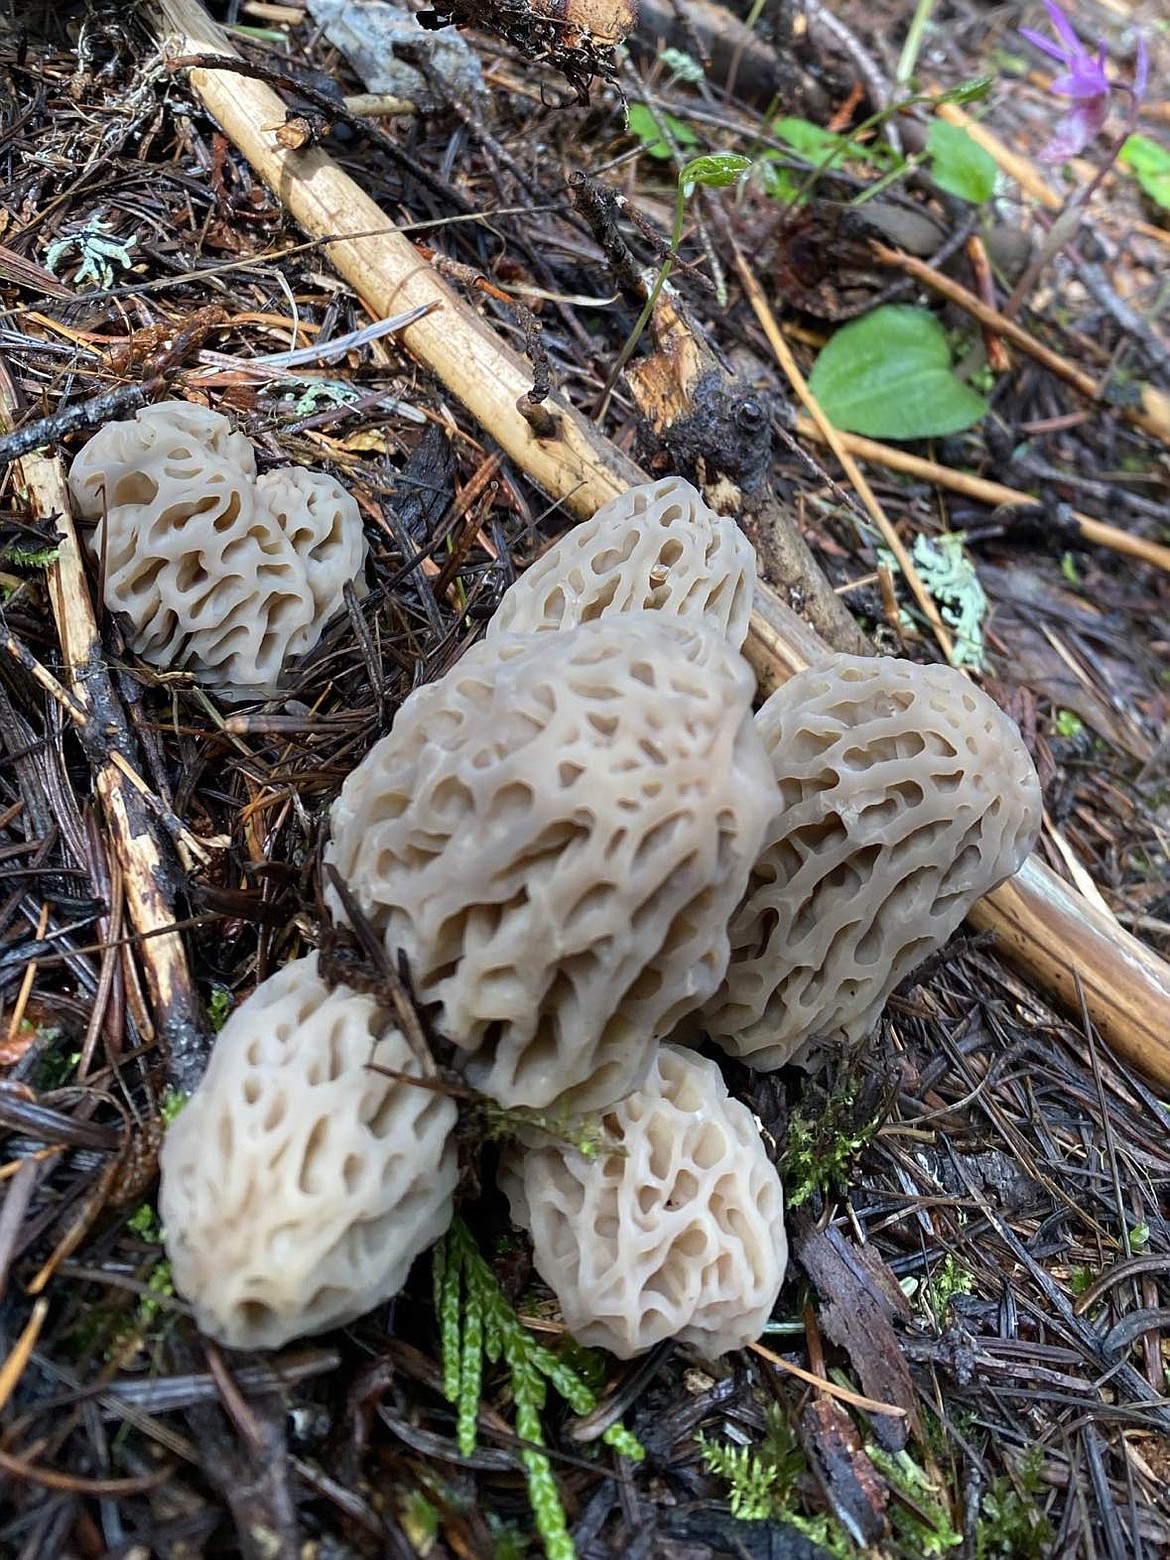 All throughout Mineral County, in dark drainages, new burns, and recently logged areas, morel mushrooms are popping this spring. (Photo courtesy/Sandra Connor)